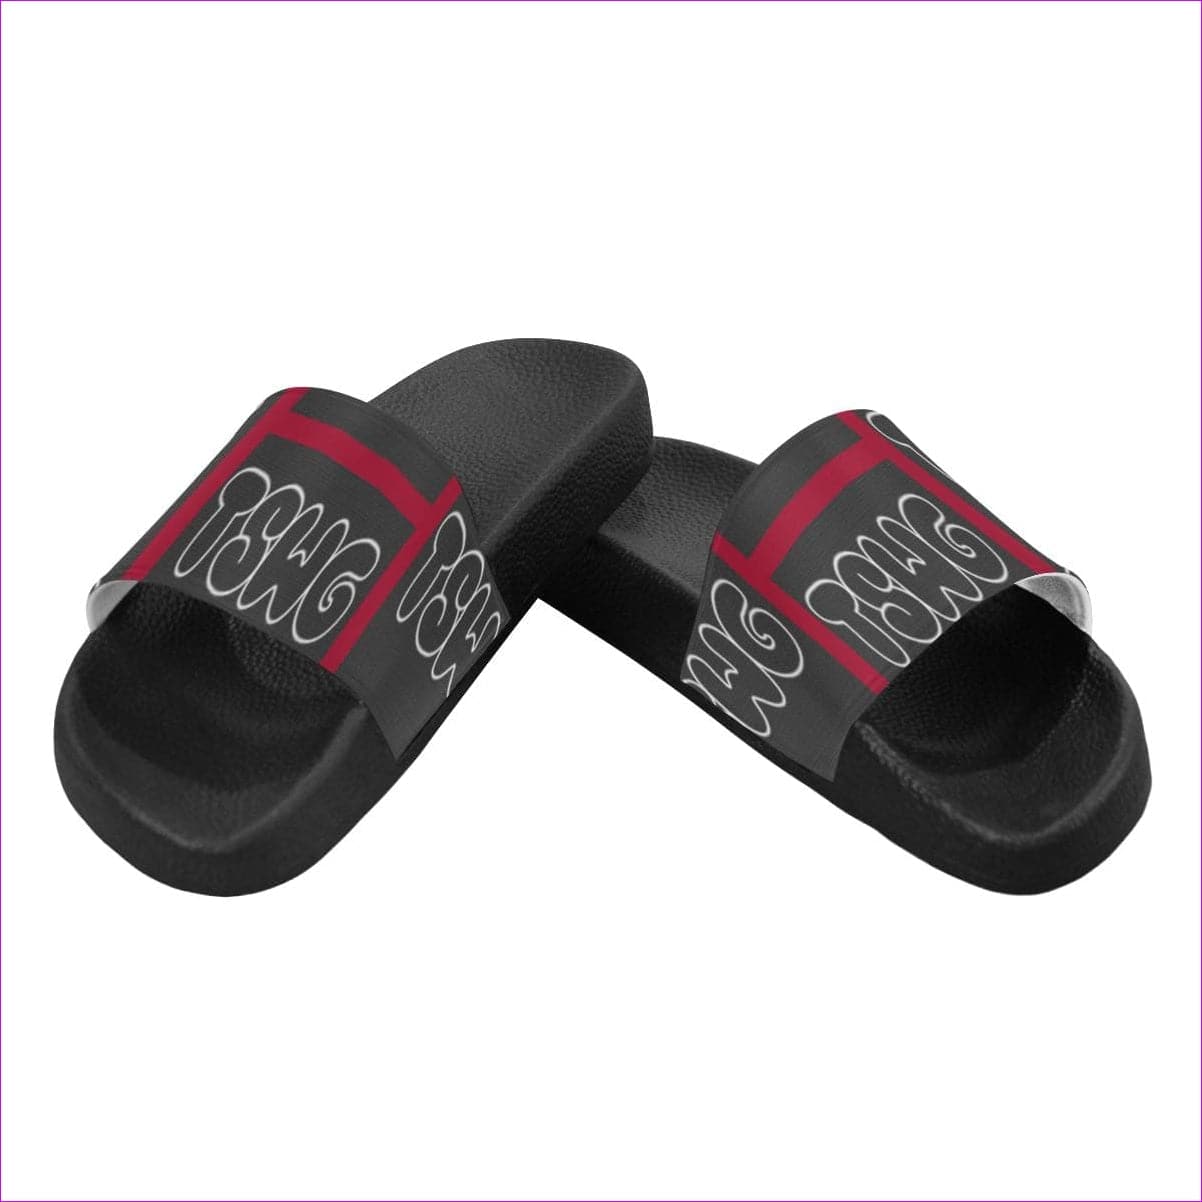 TSWG (Tough Smooth Well Groomed) Red Block Slides* Men's Slide Sandals(Model 057) - TSWG (Tough Smooth Well Groomed) Men's Slide Sandals - mens shoe at TFC&H Co.